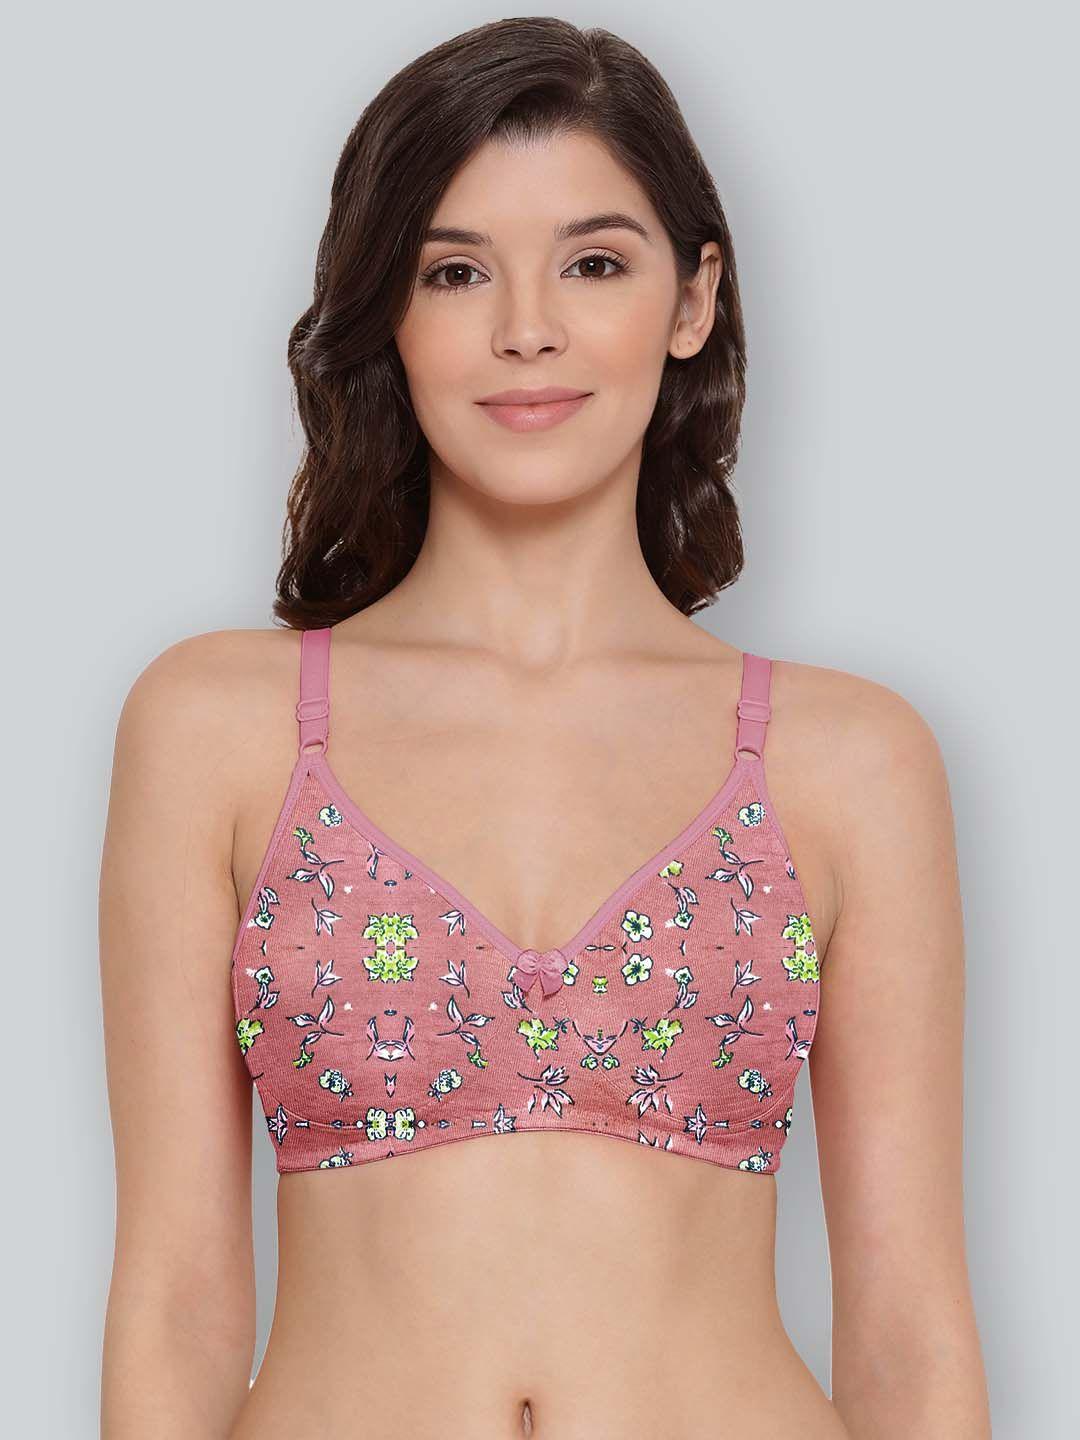 lyra-floral-printed-full-cotton-coverage-bra-all-day-comfort